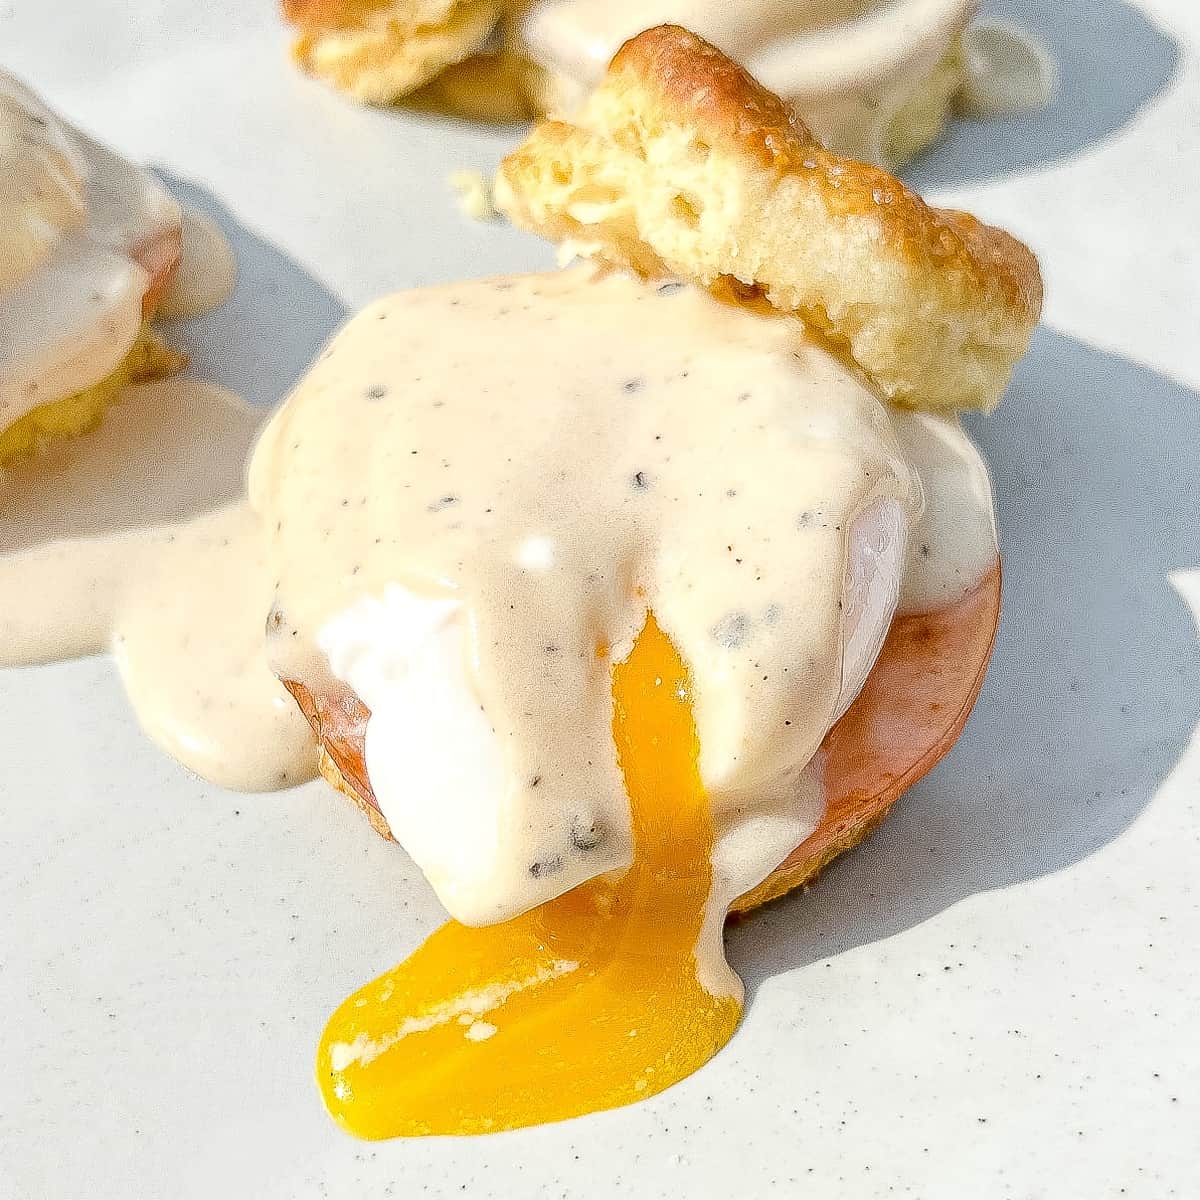 biscuit eggs benedict with a runny yolk.